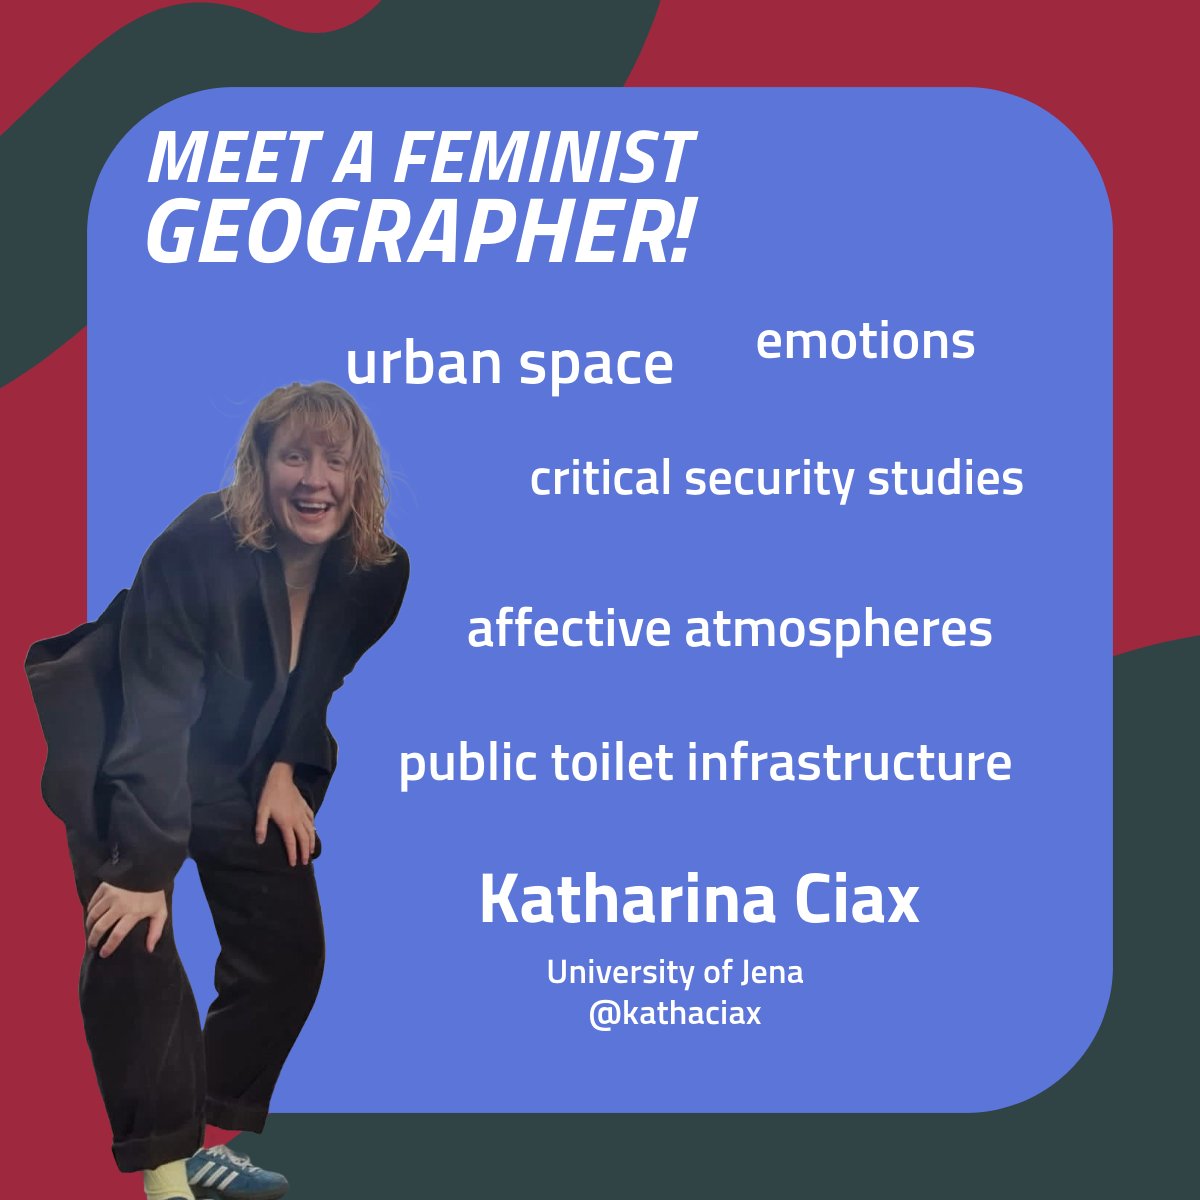 #MeetAFeministGeographer! Katharina Ciax (@kathaciax) of Jena University! As a social geographer, Katharina Ciax focuses on the (inter-)relation of spaces, emotions, and securities...